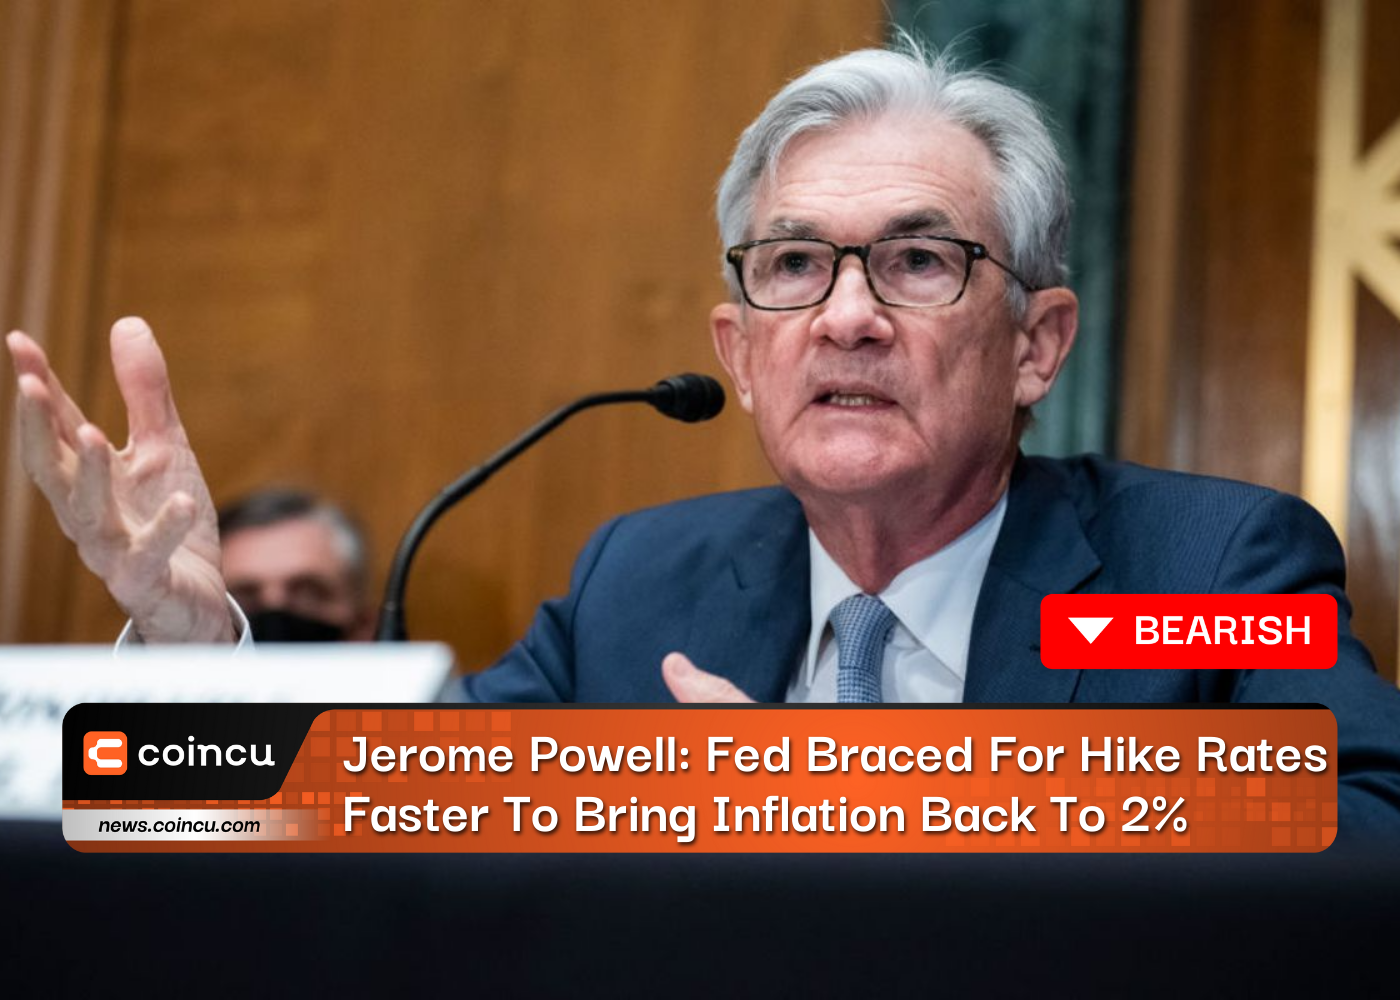 Jerome Powell: Fed Braced For Hike Rates Faster To Bring Inflation Back To 2%